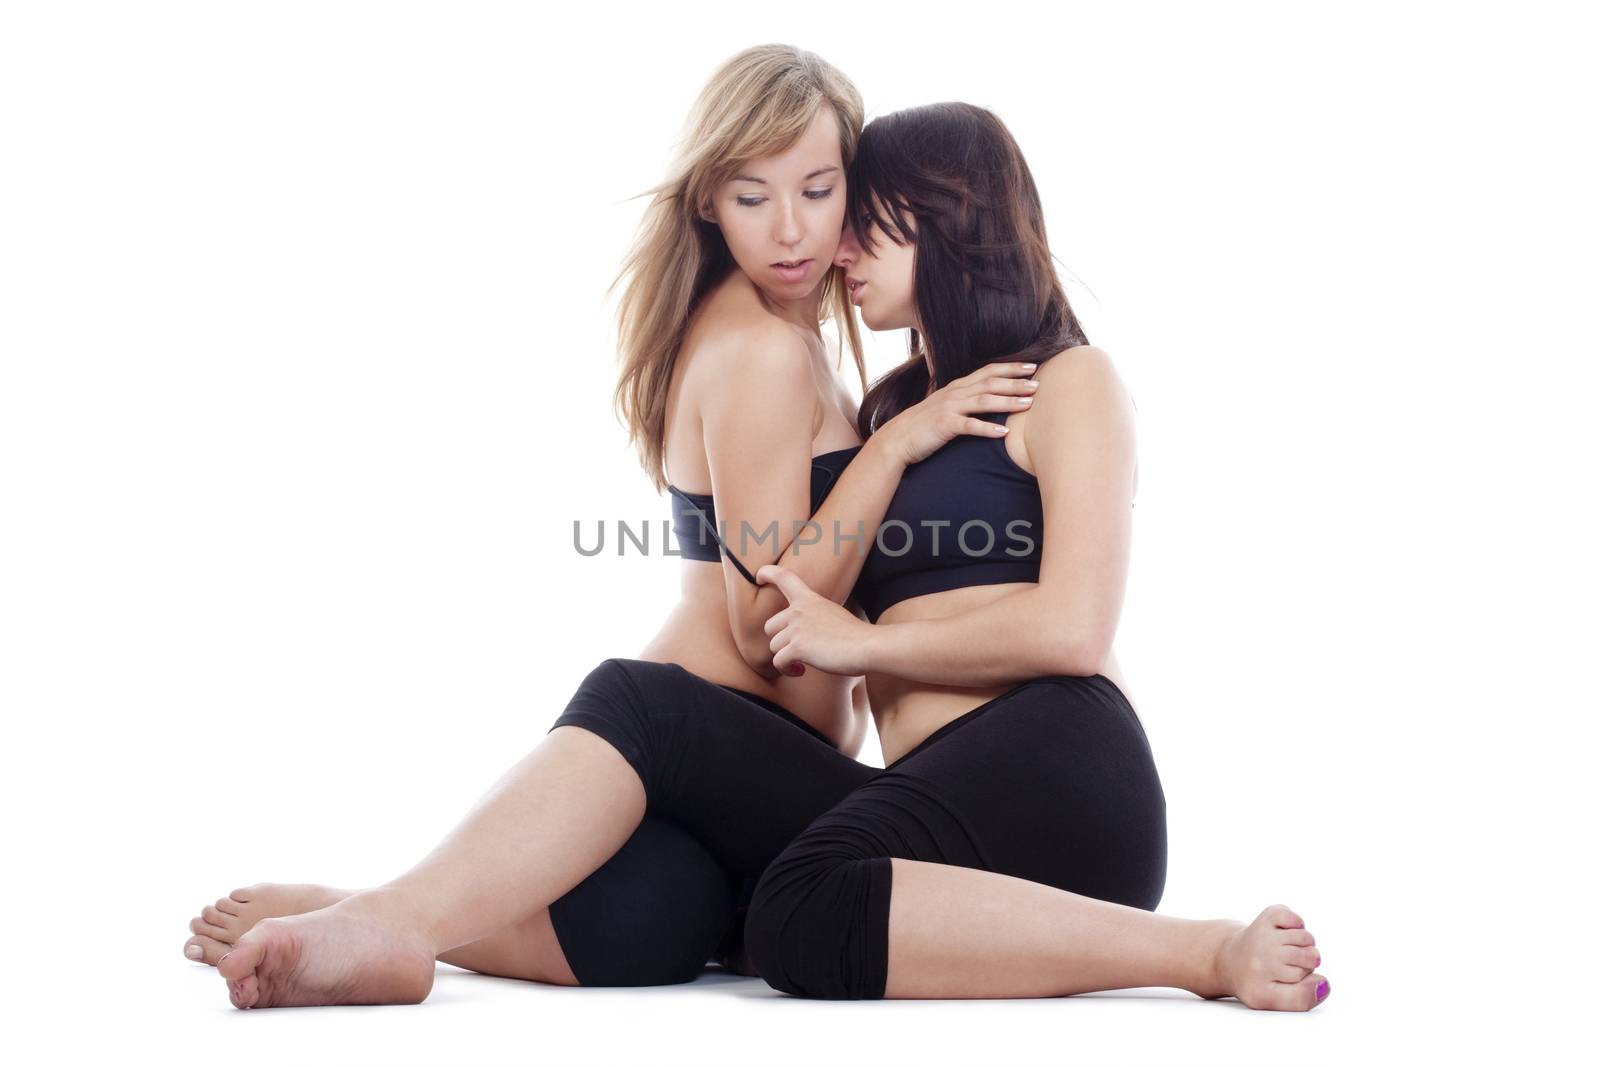 two young women sitting on the floor touching each other - isolated on white